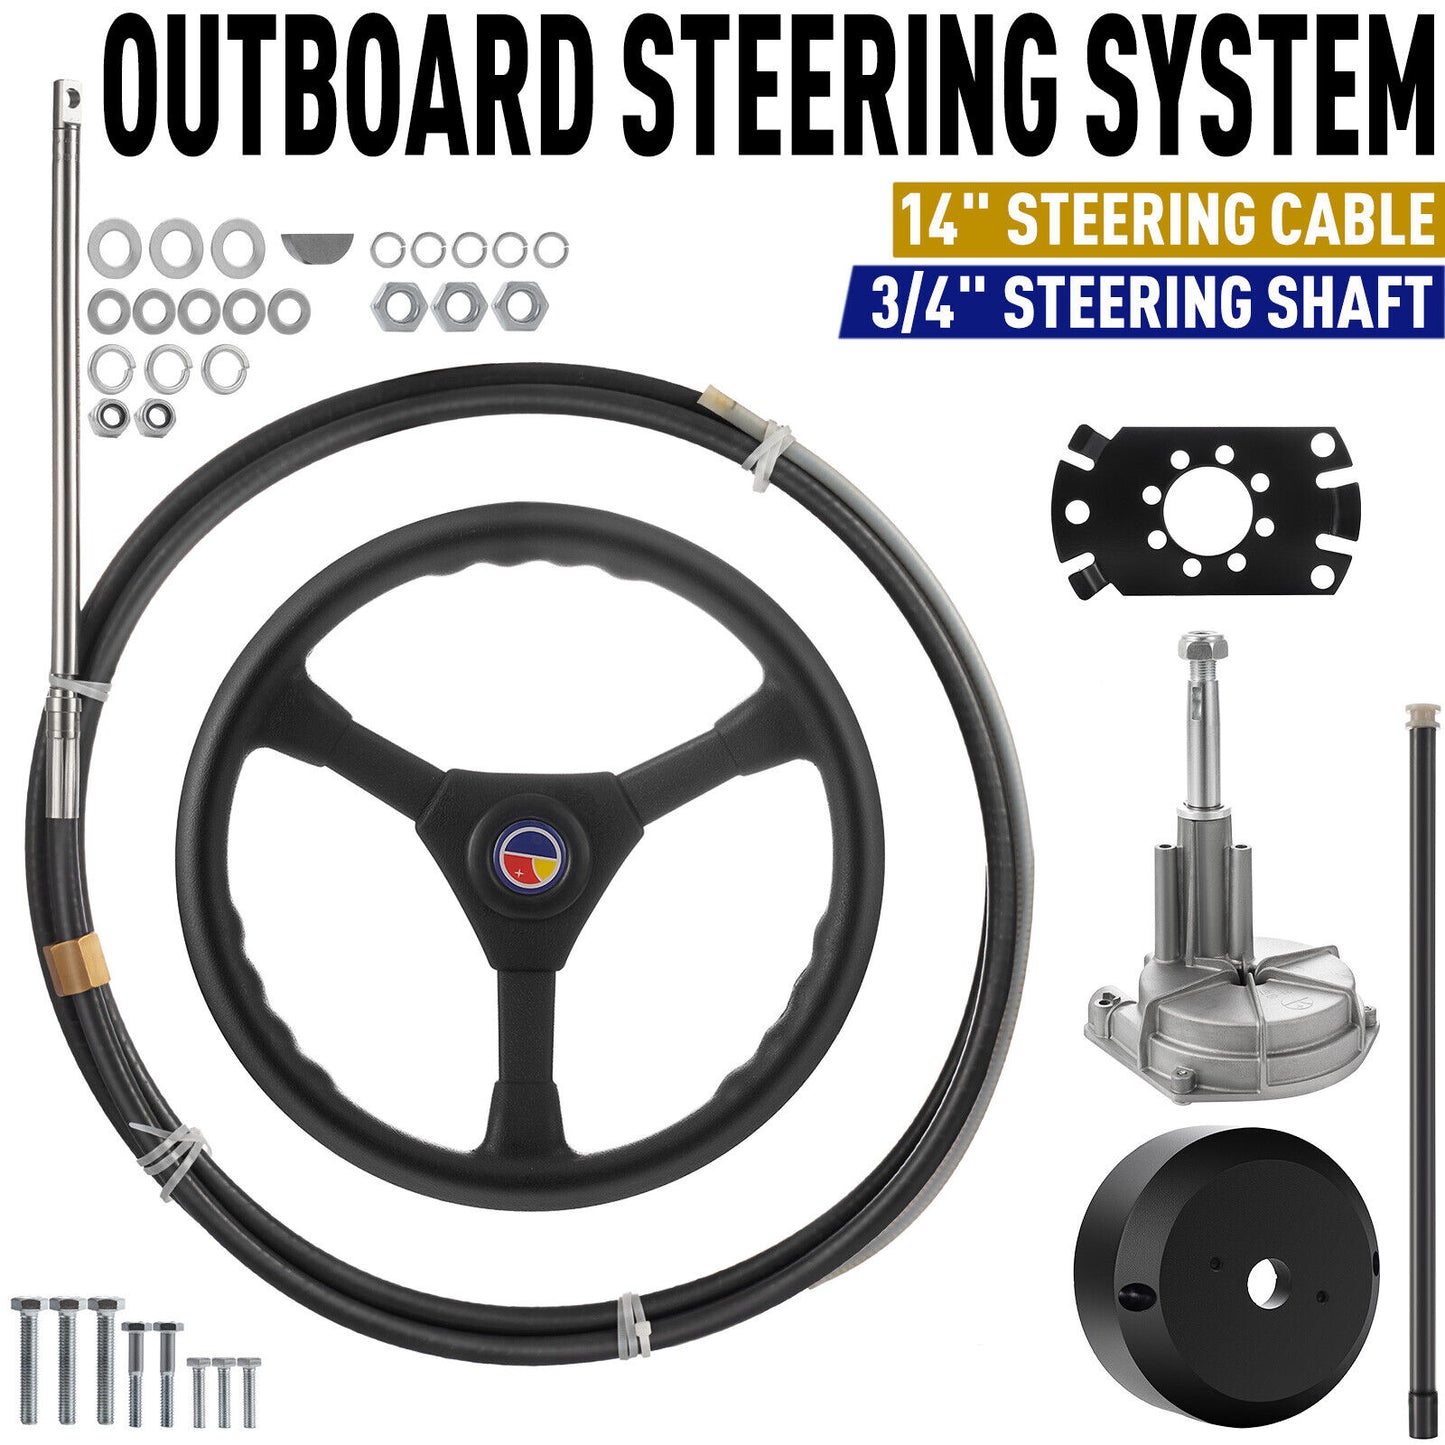 14 Feet Boat Rotary Steering System Outboard Kit SS13714 Marine With 13.5" Wheel